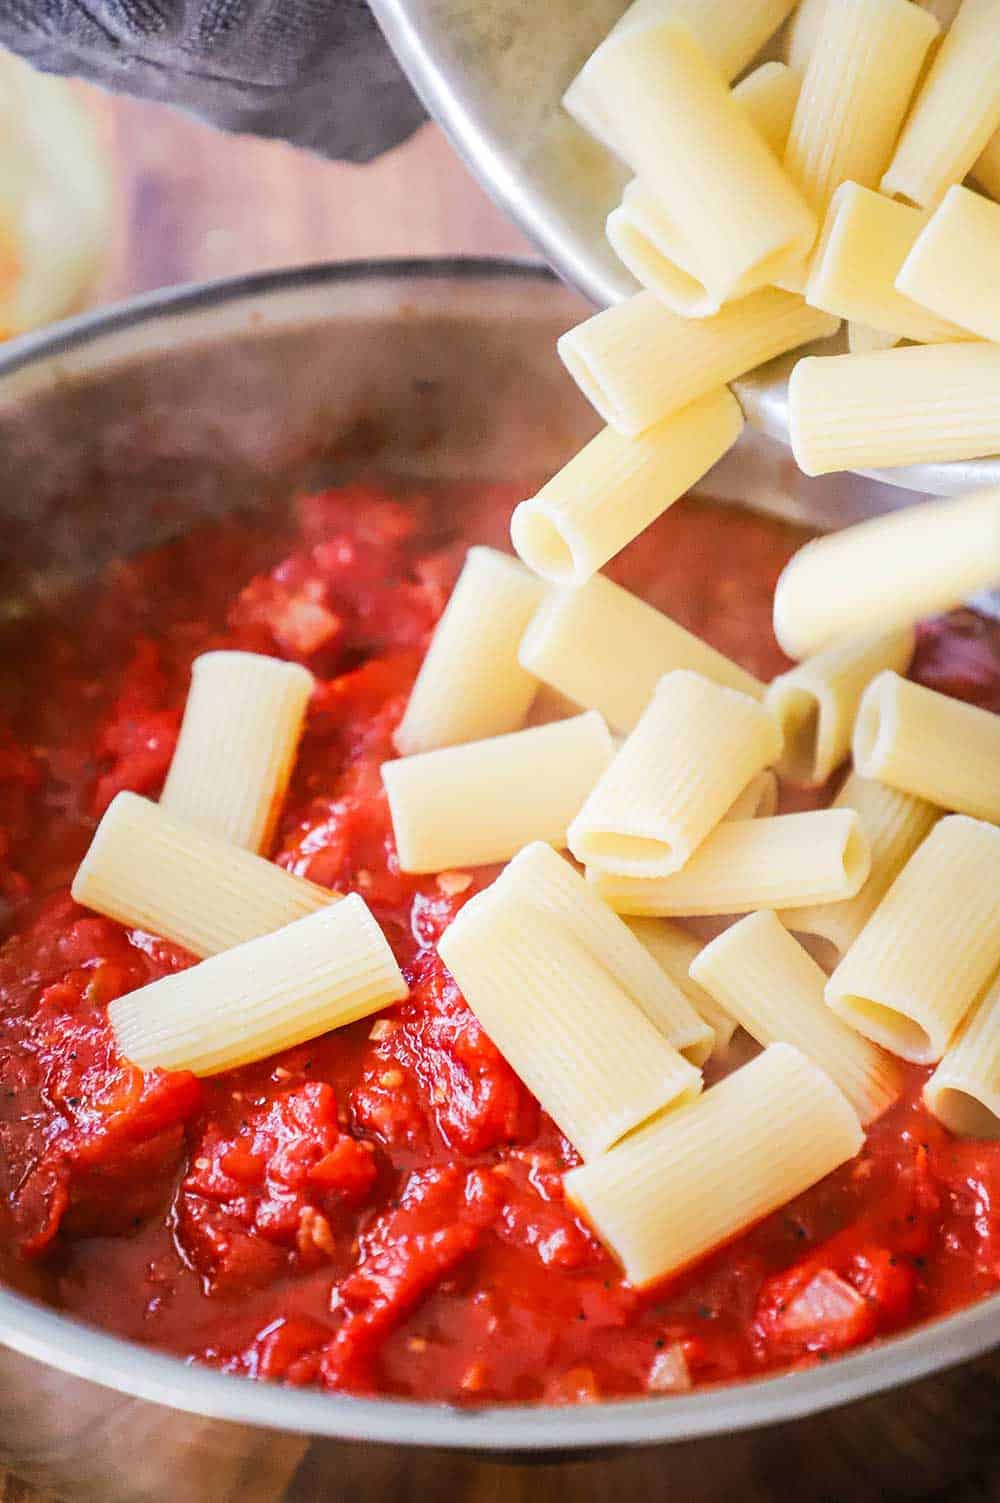 Cooked rigatoni pasta being transferred into a skillet filled with a simmering tomato sauce.